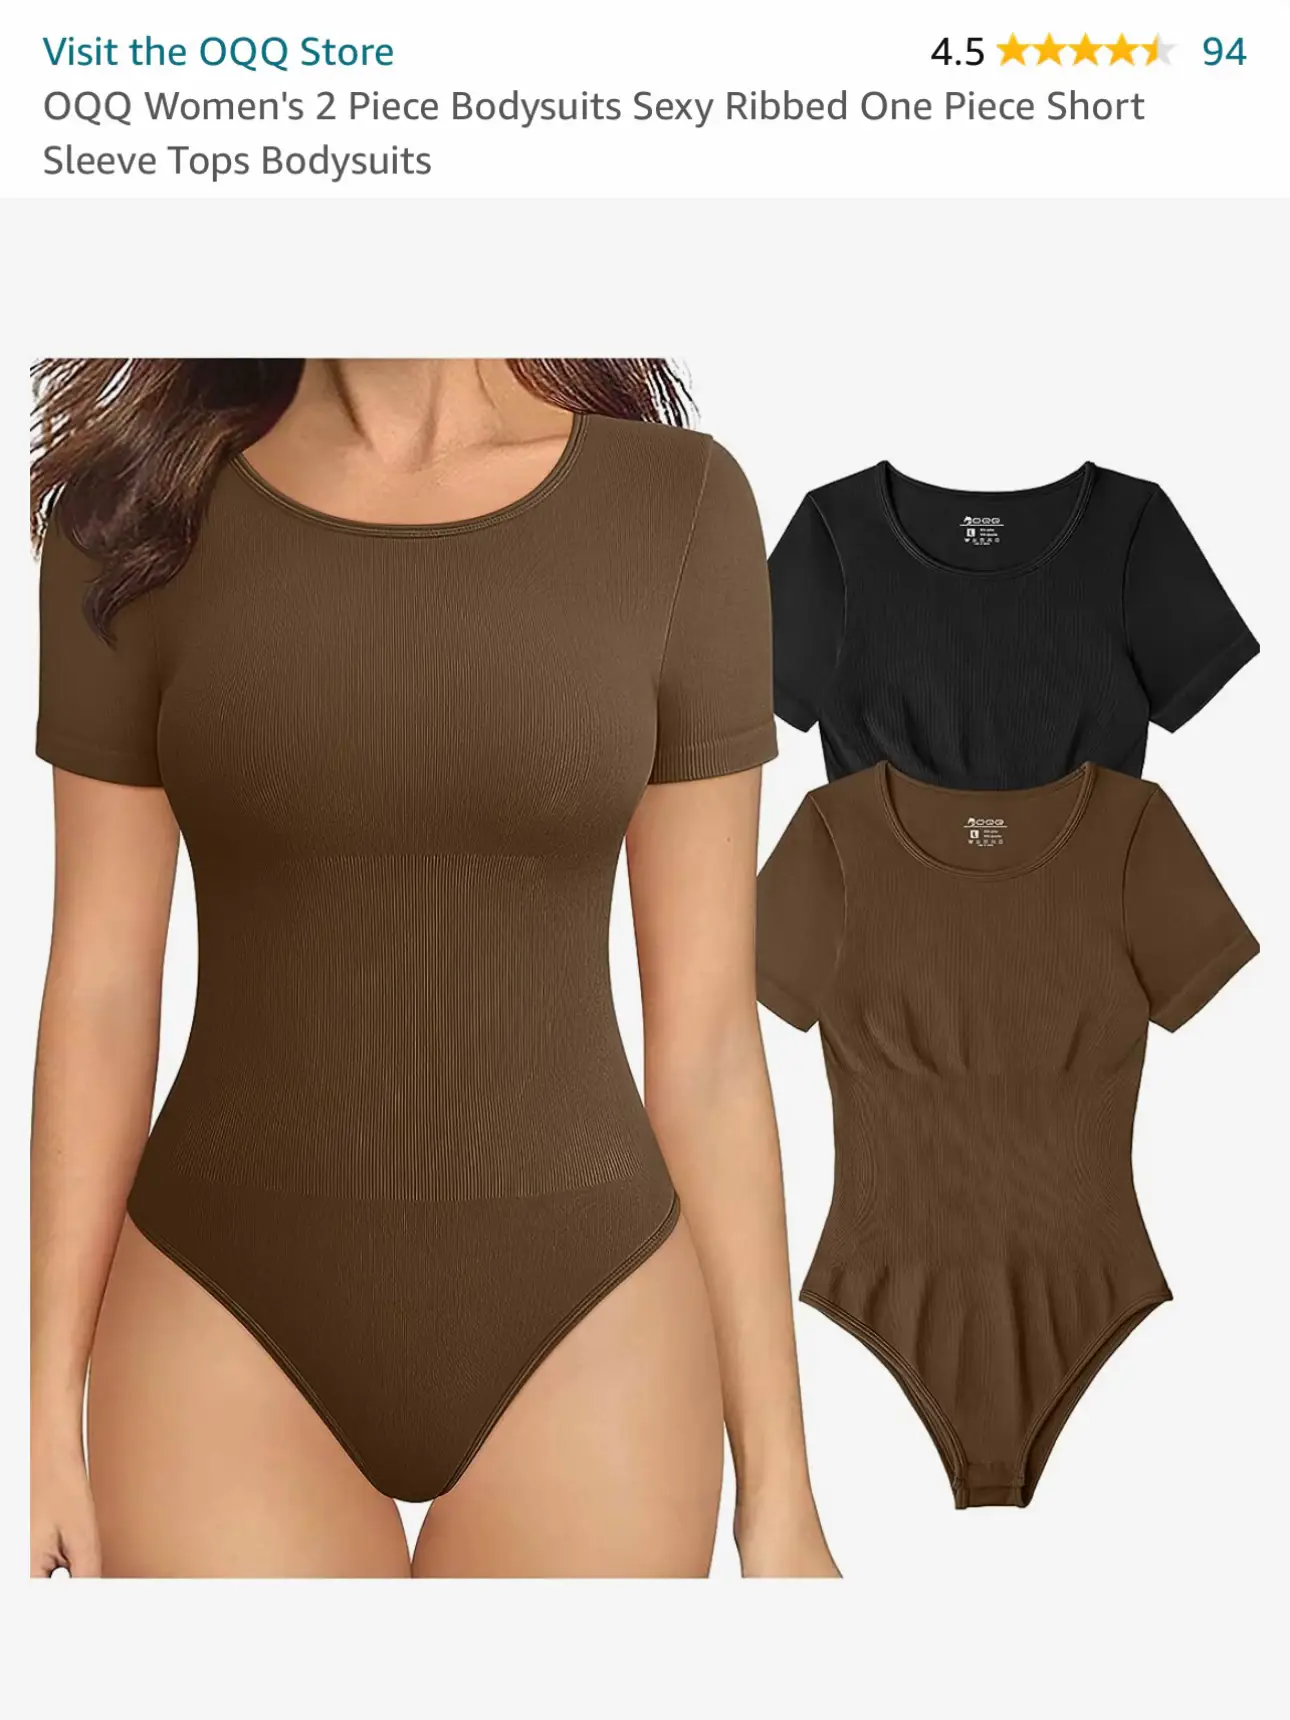  OQQ Women's 2 Piece Bodysuits Sexy Ribbed One Piece Zip Front  Long Sleeve Tops Bodysuits Black Beige : OQQ: Clothing, Shoes & Jewelry